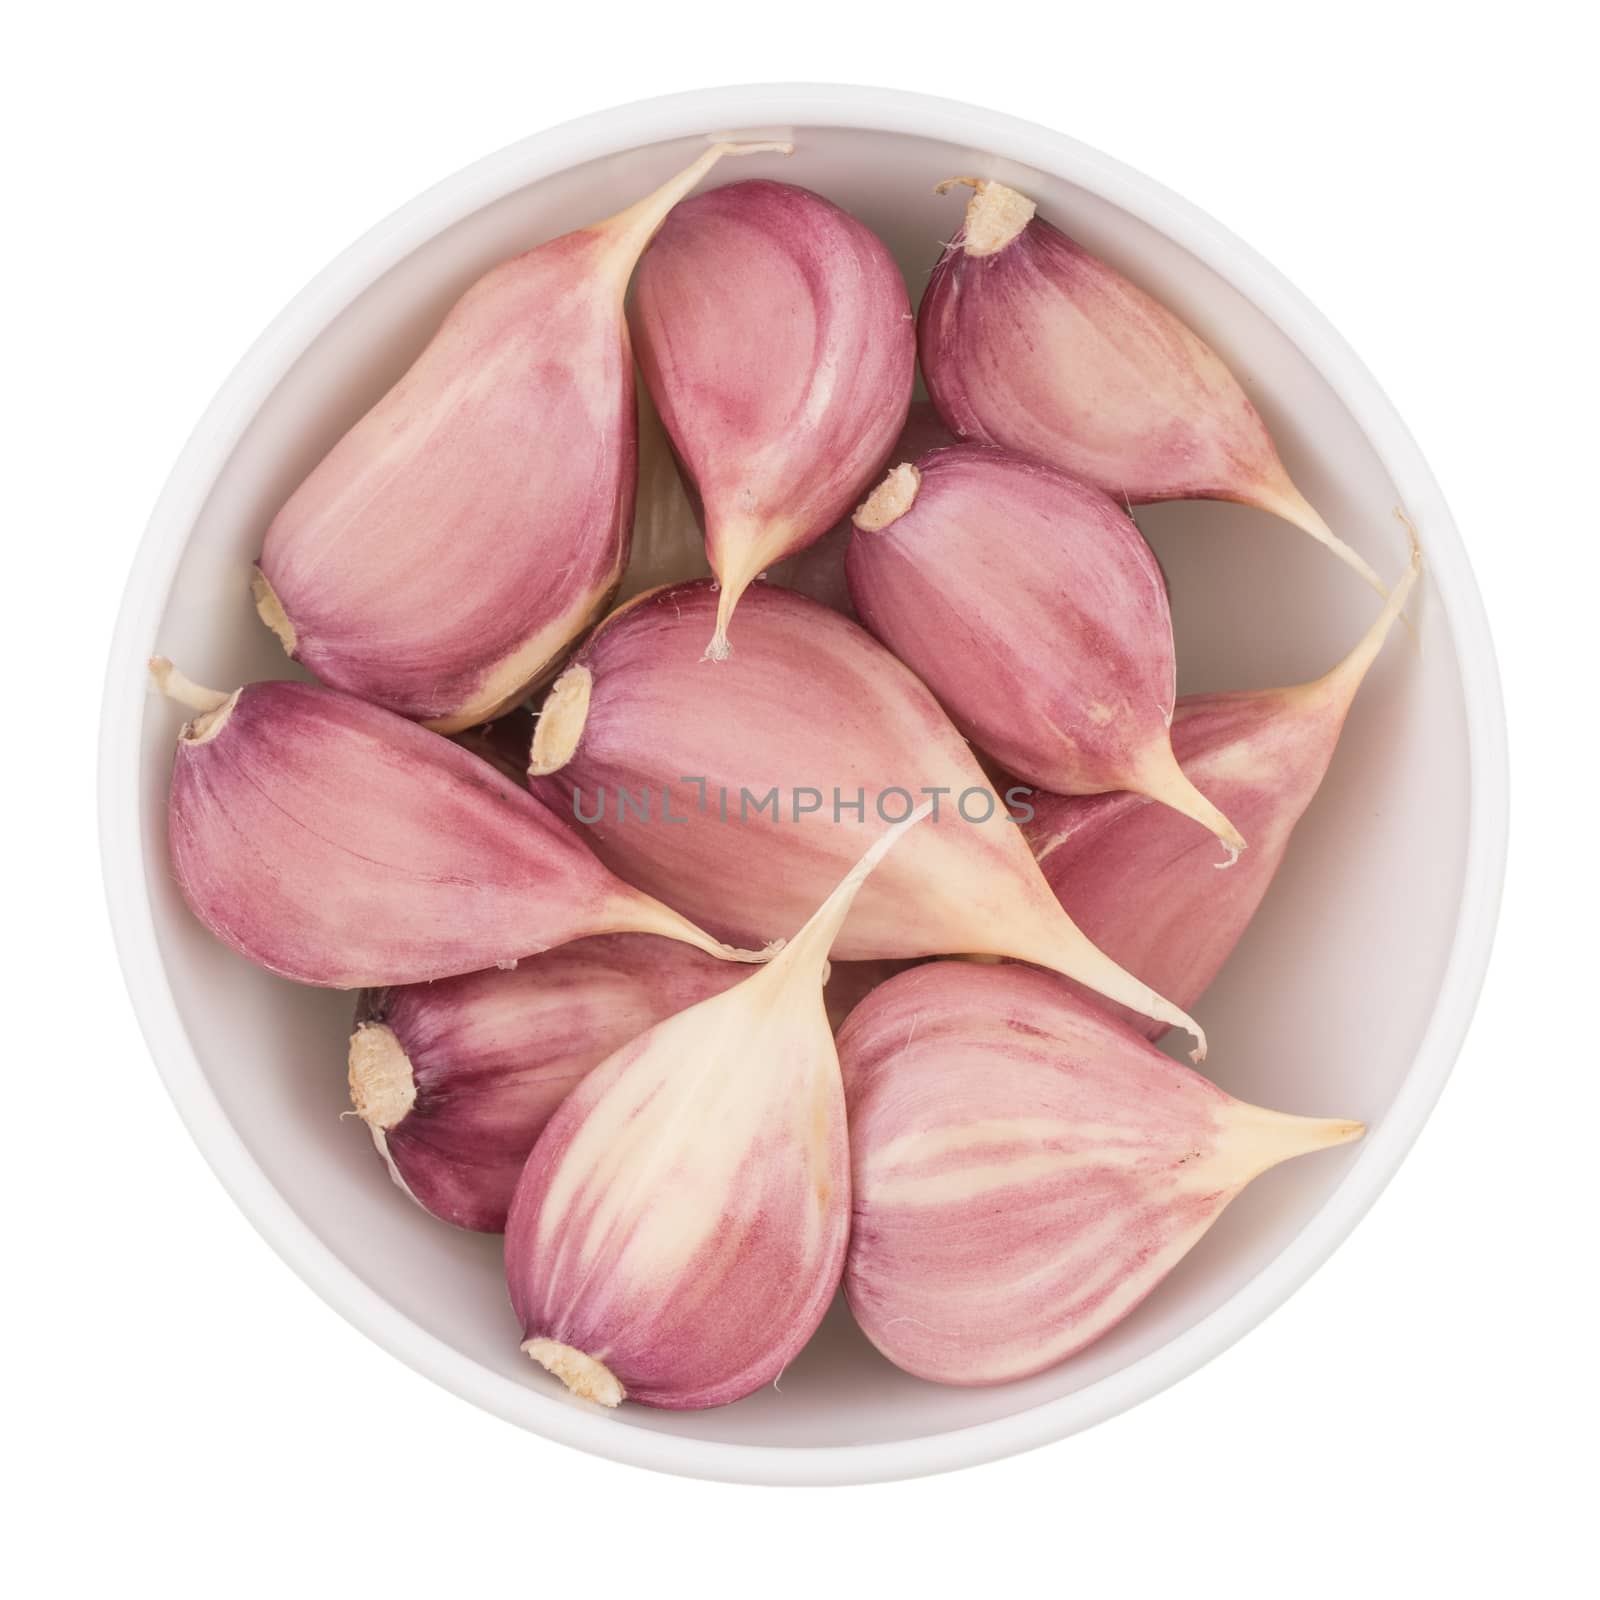 Cloves of garlic on bowl on white background seen from above